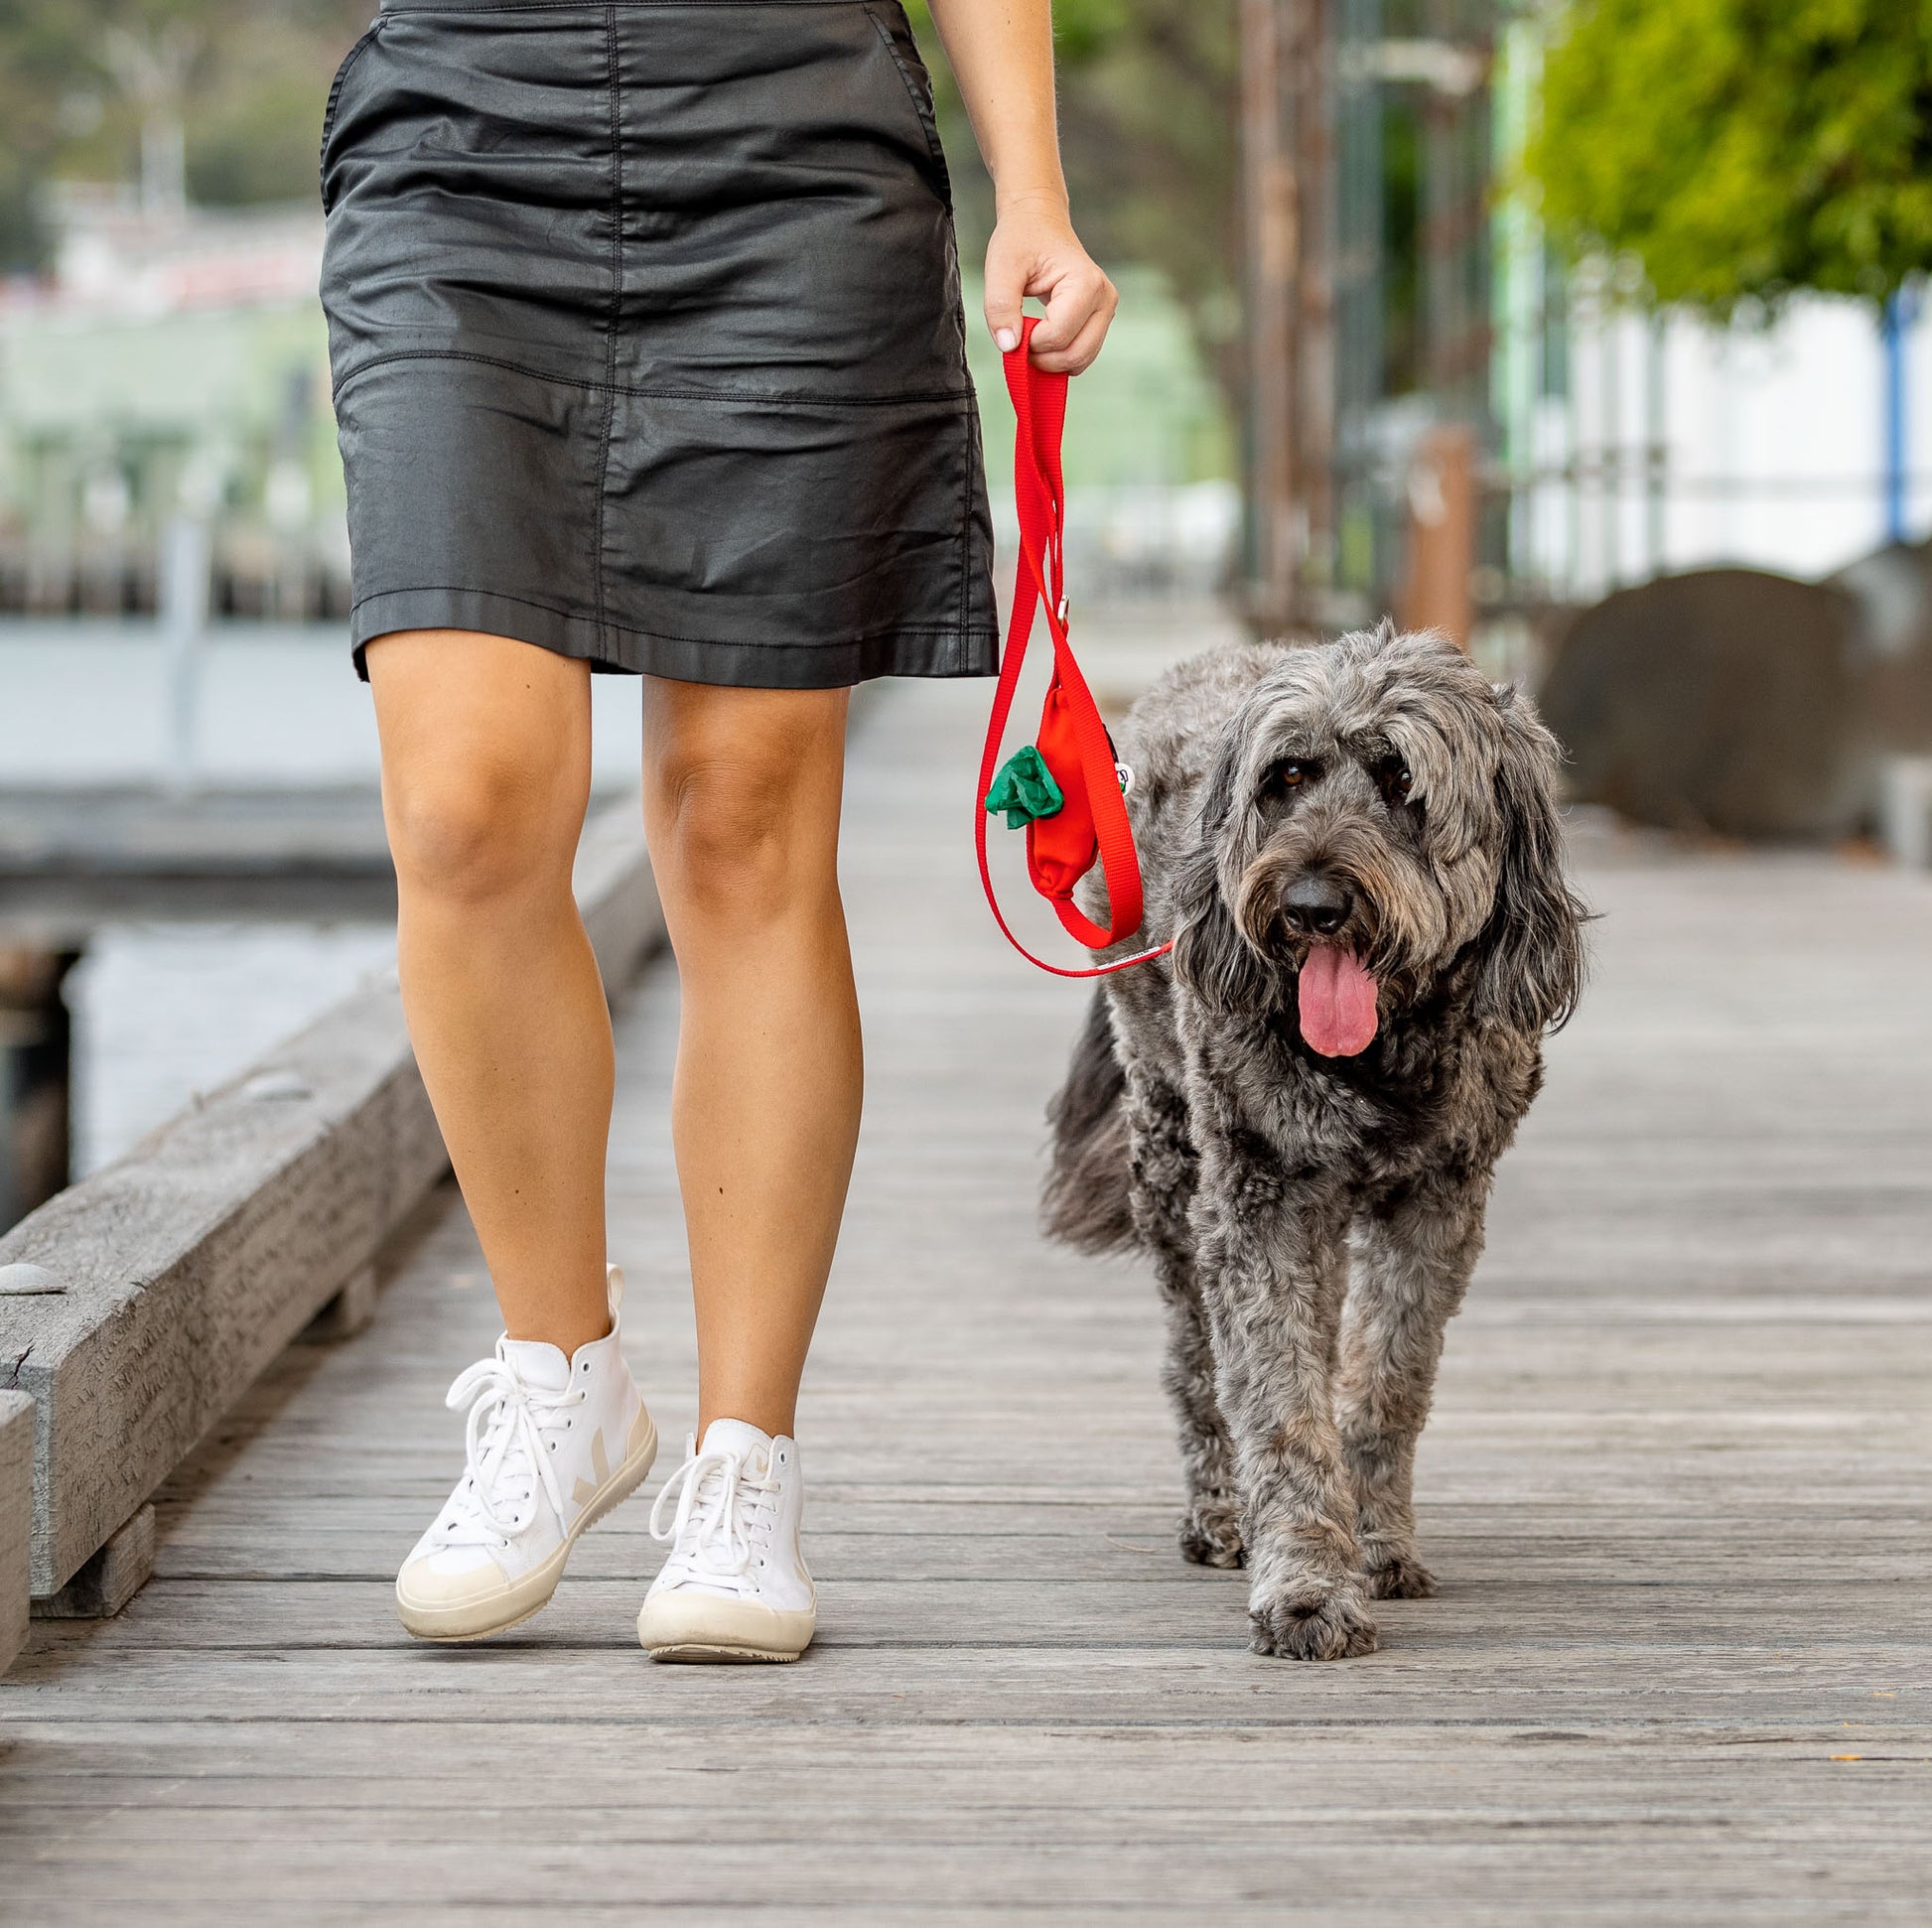 Woman walking Groodle holding red dog lead